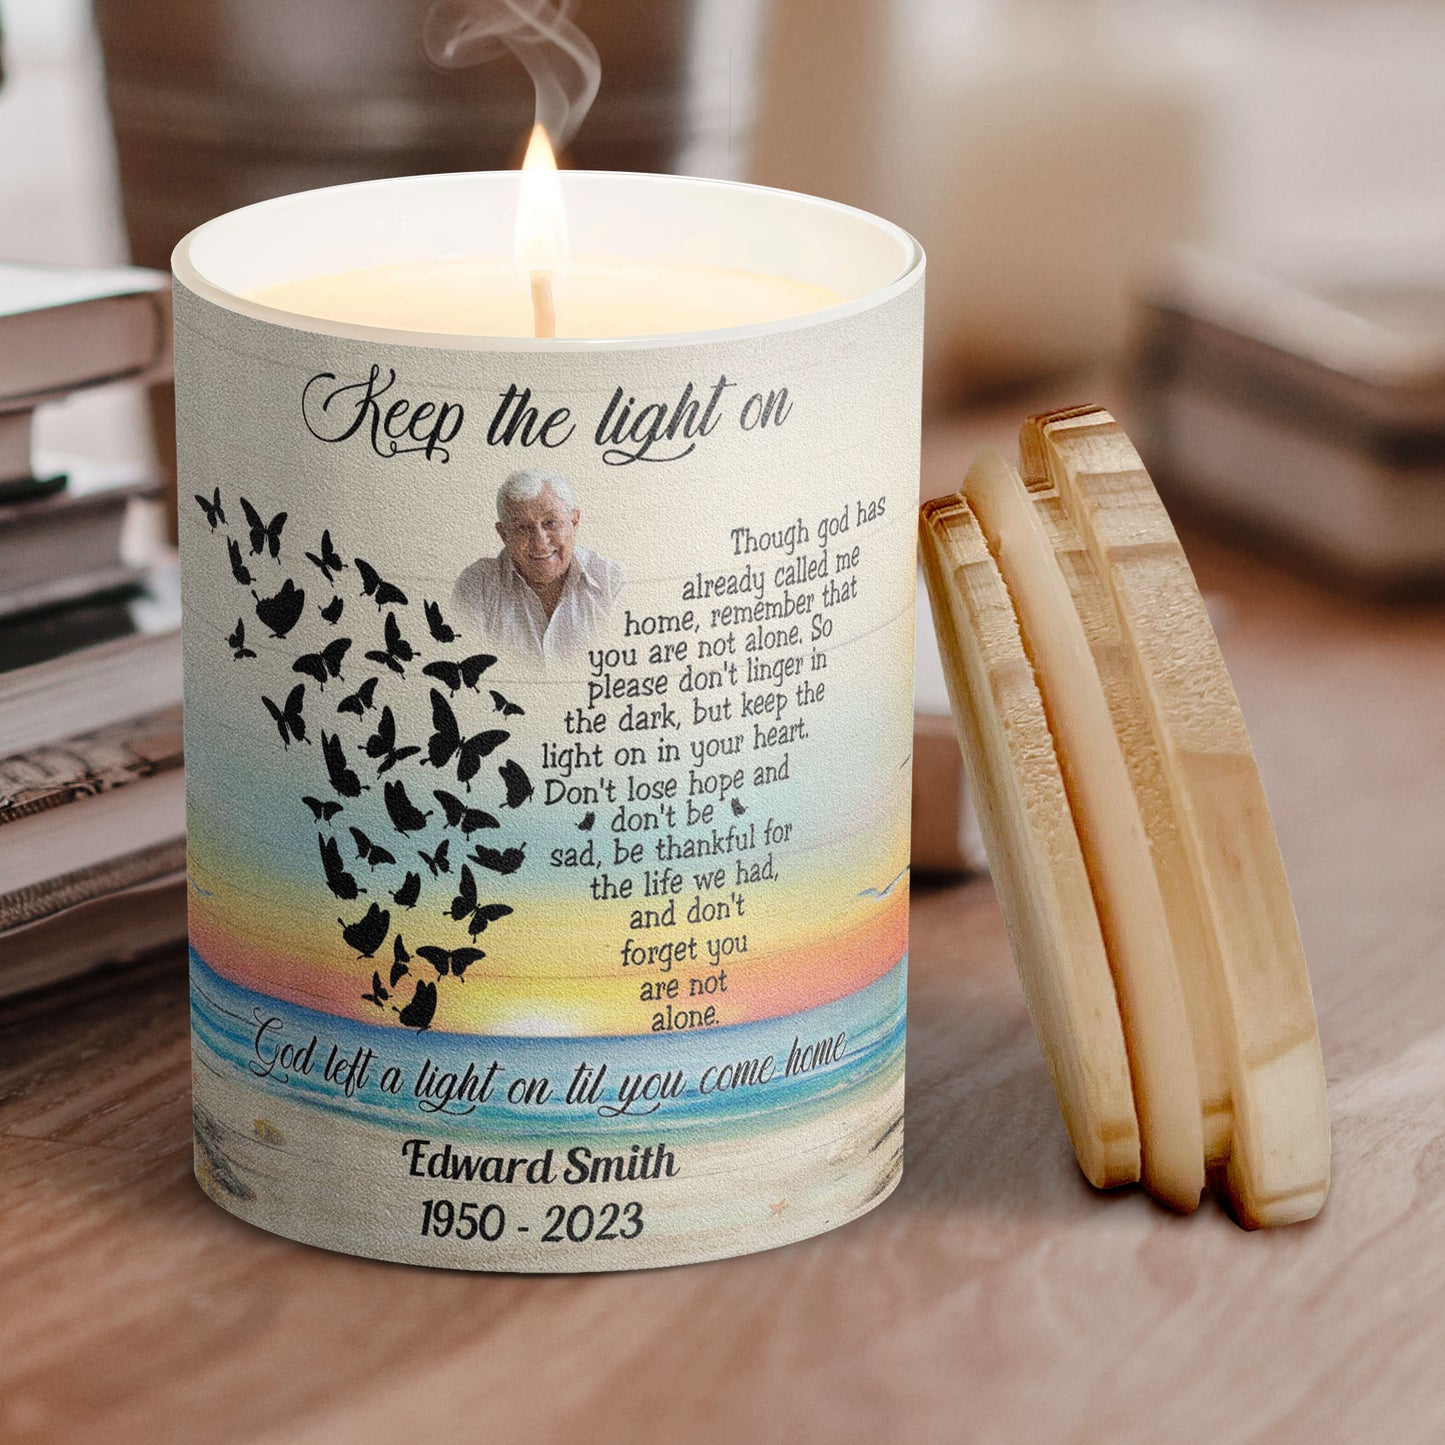 Keep The Light On Though God Has Already Called Me Home - Personalized Photo Scented Candle With Wooden Lid